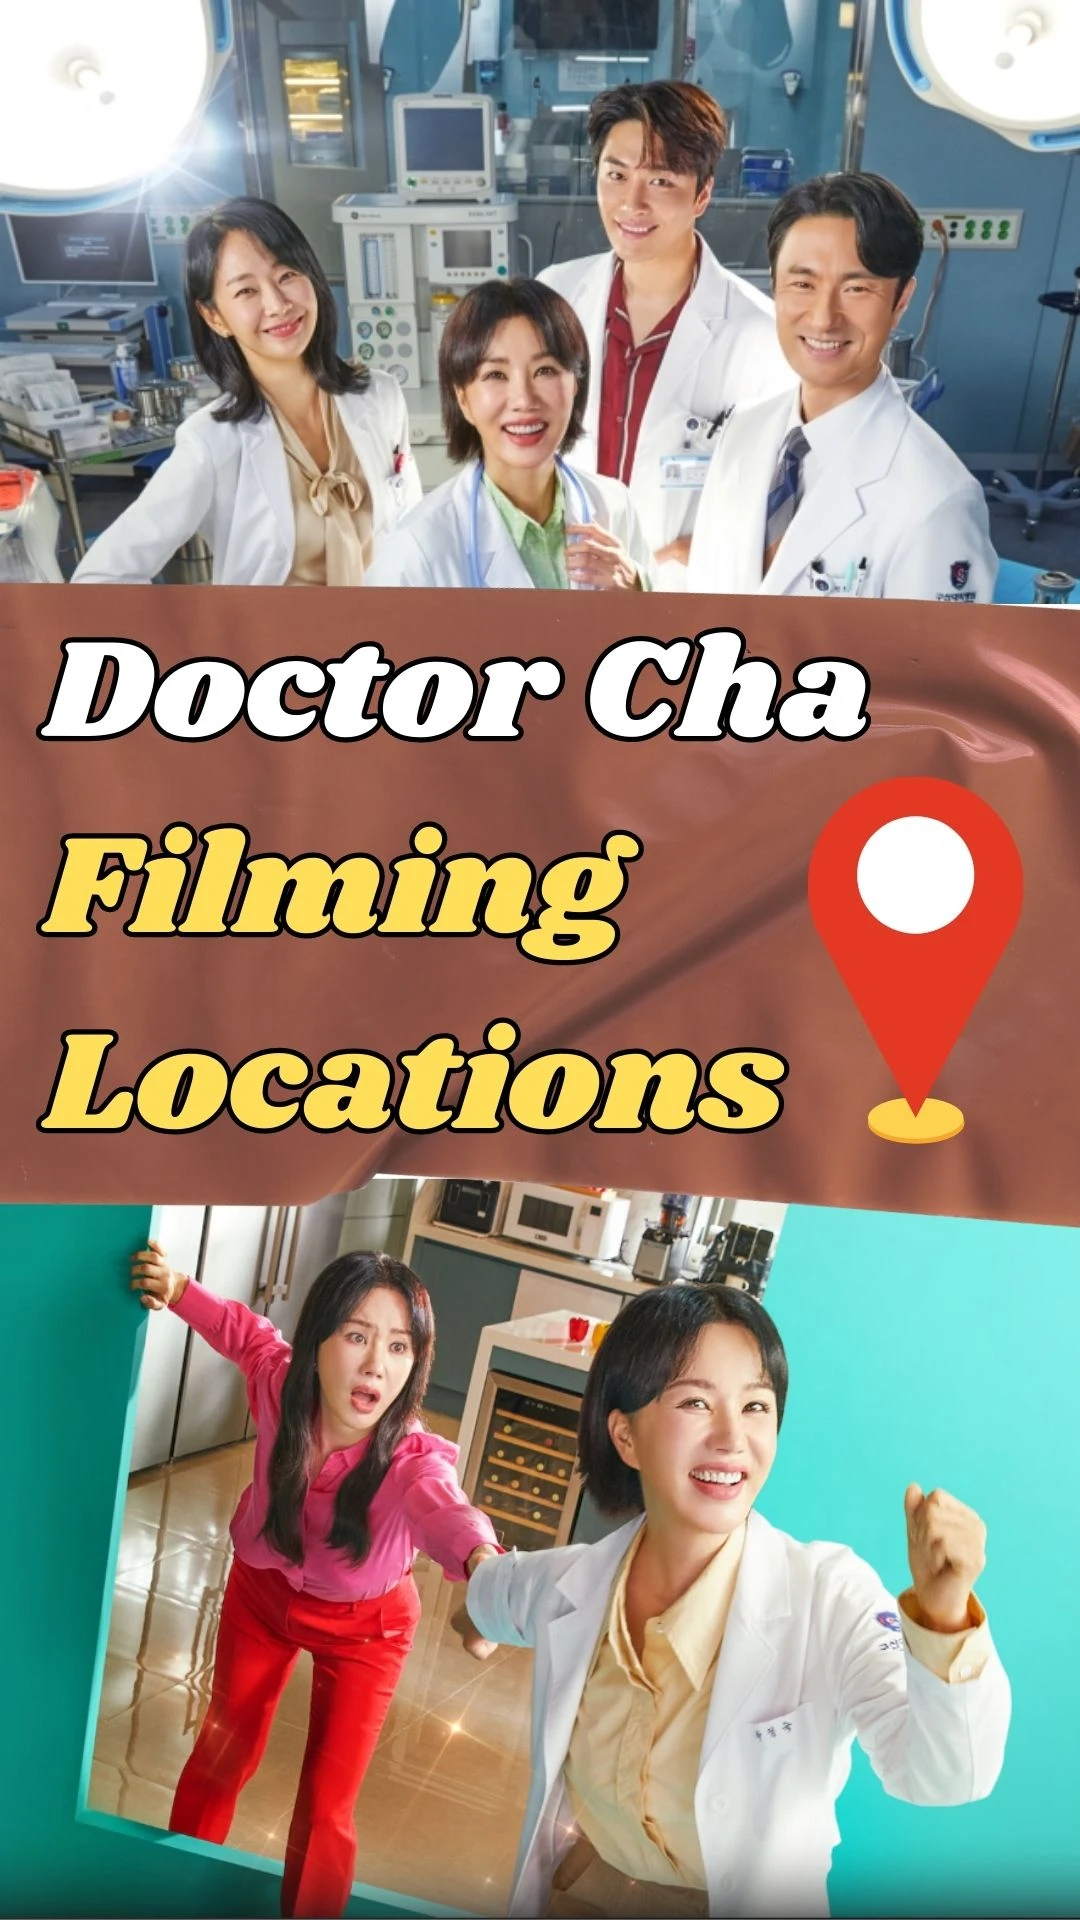 Doctor Cha Filming Locations